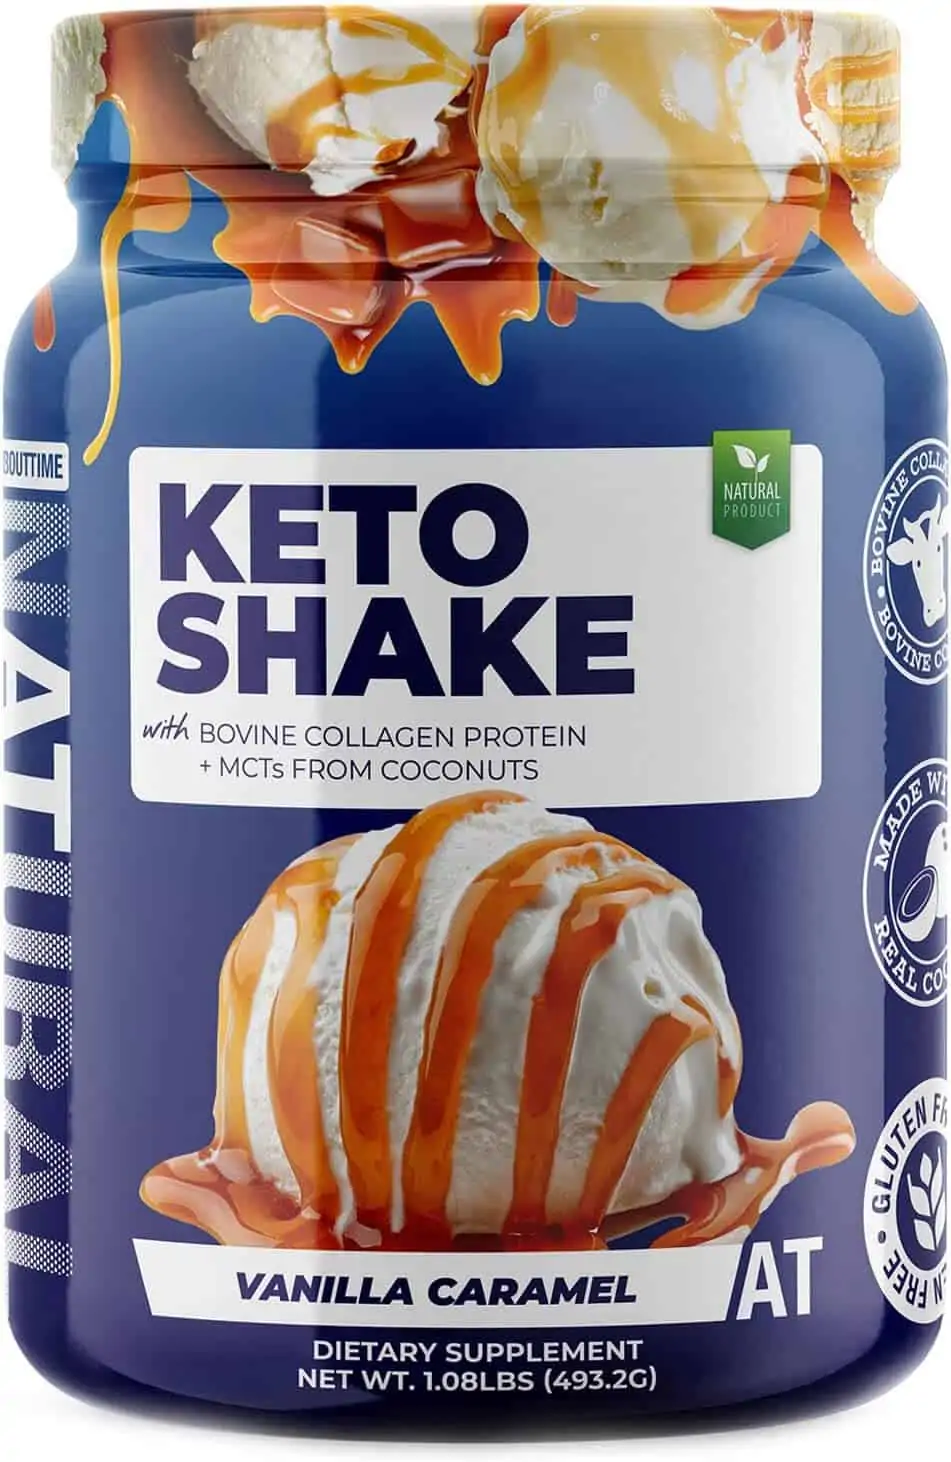 About Time Keto Shake